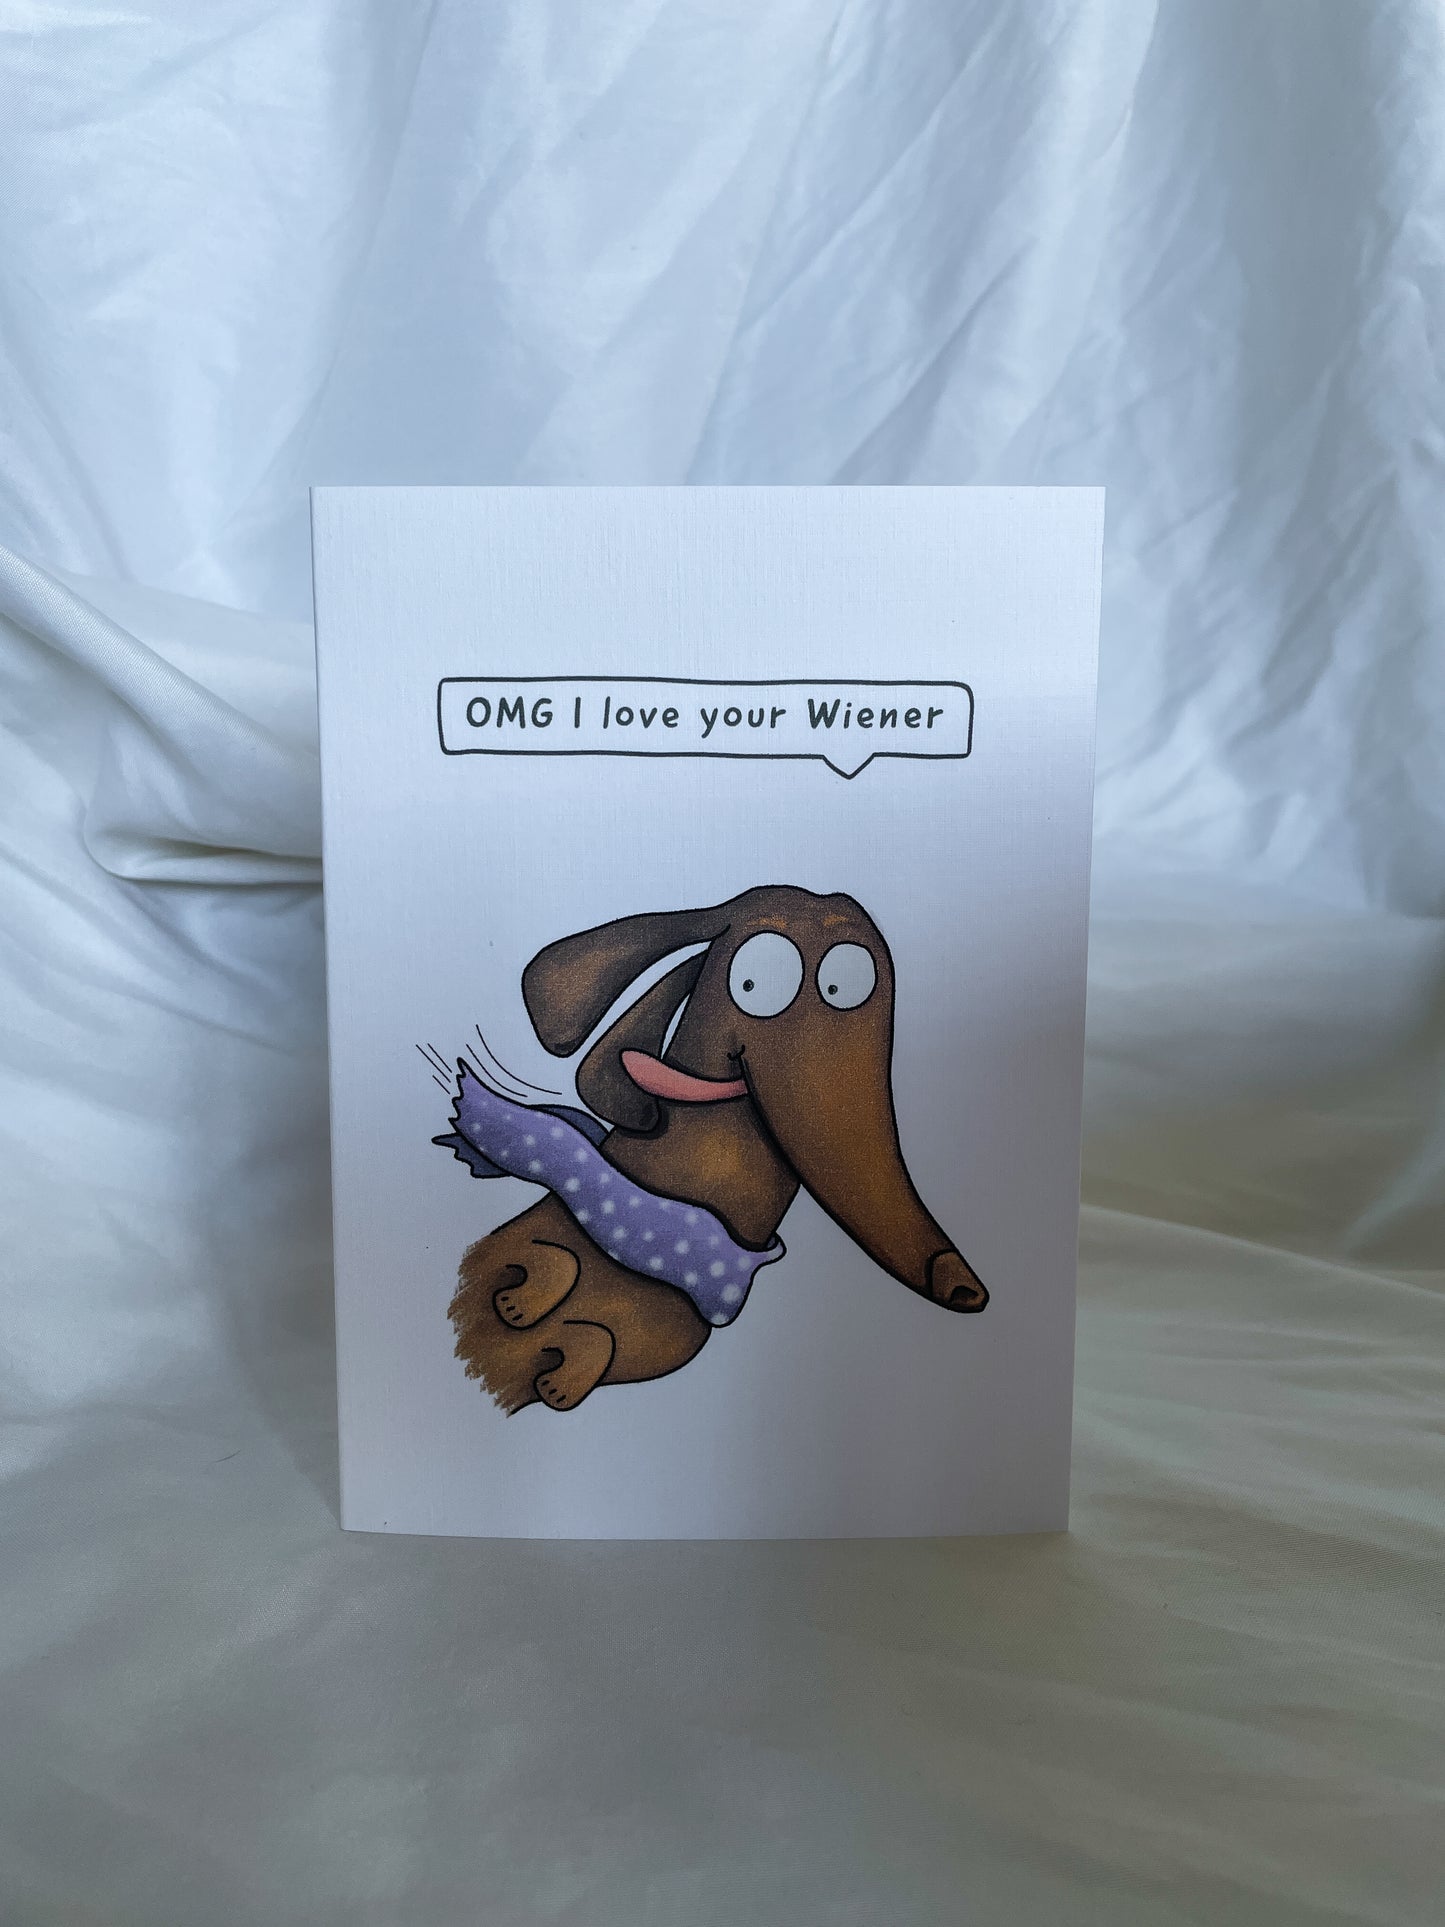 Whimsical wiener dog card. I love your wiener